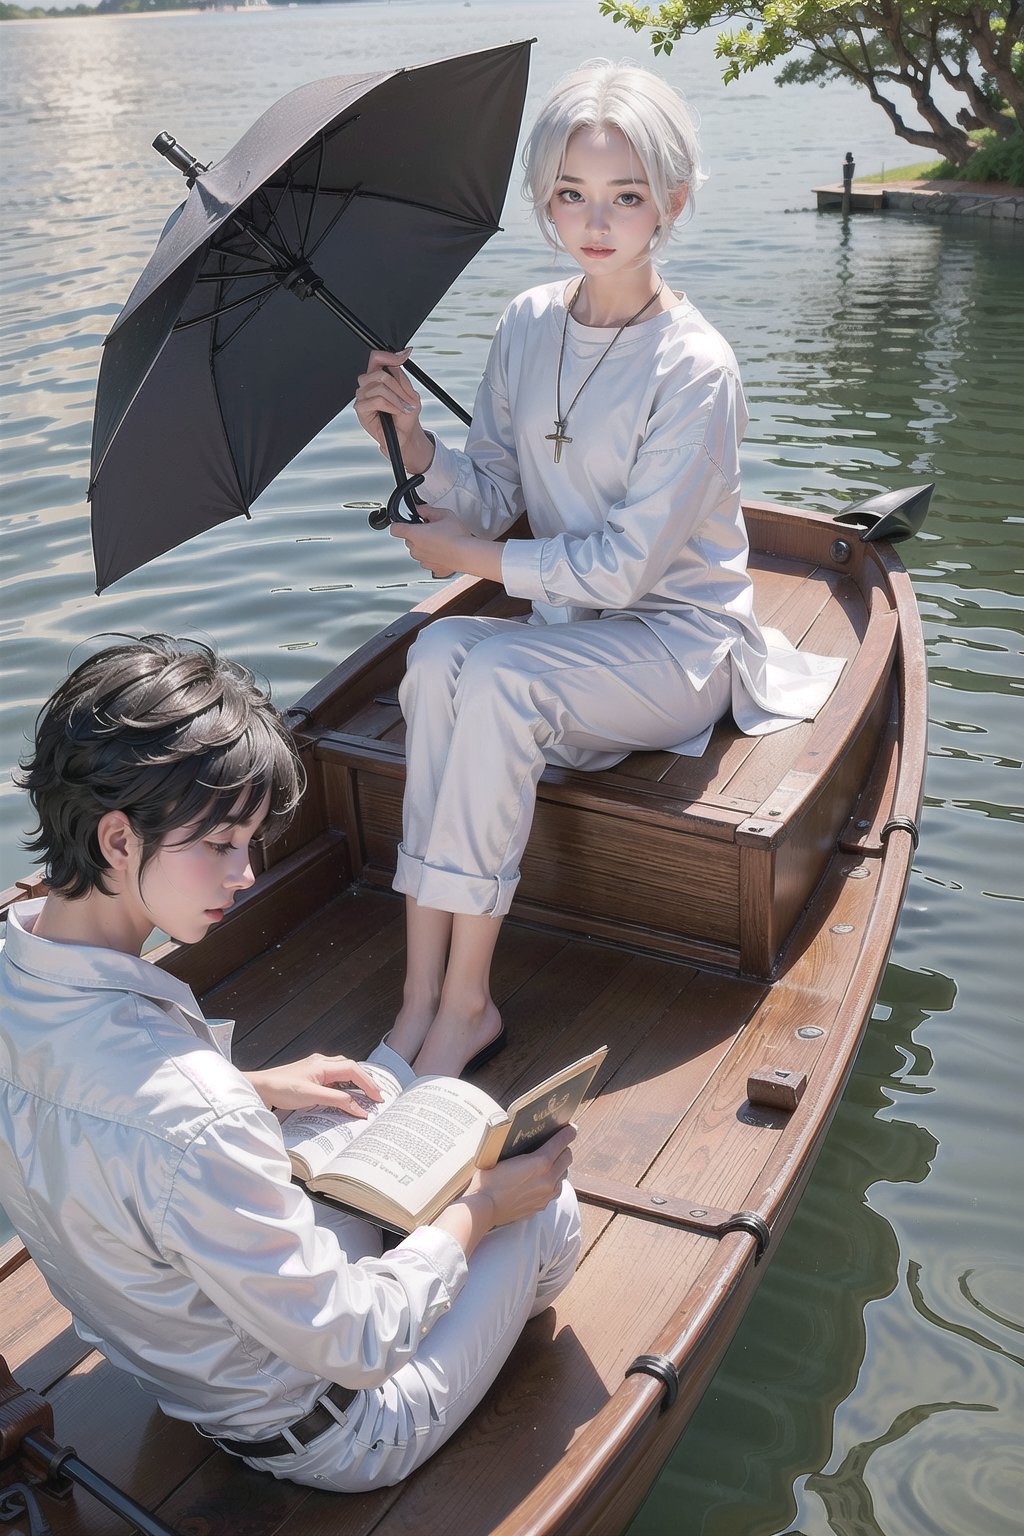 (1girl, black hair, black hair,  black dress,  hair bow ,jewelry, necklace, holding umbrella), 
(1boy, white hair, holding book, book, reading, white shirt, white trousers,) 
(1 boy 1 girl sitting in boat, boat on water), realistic, watercraft, trees,flowers